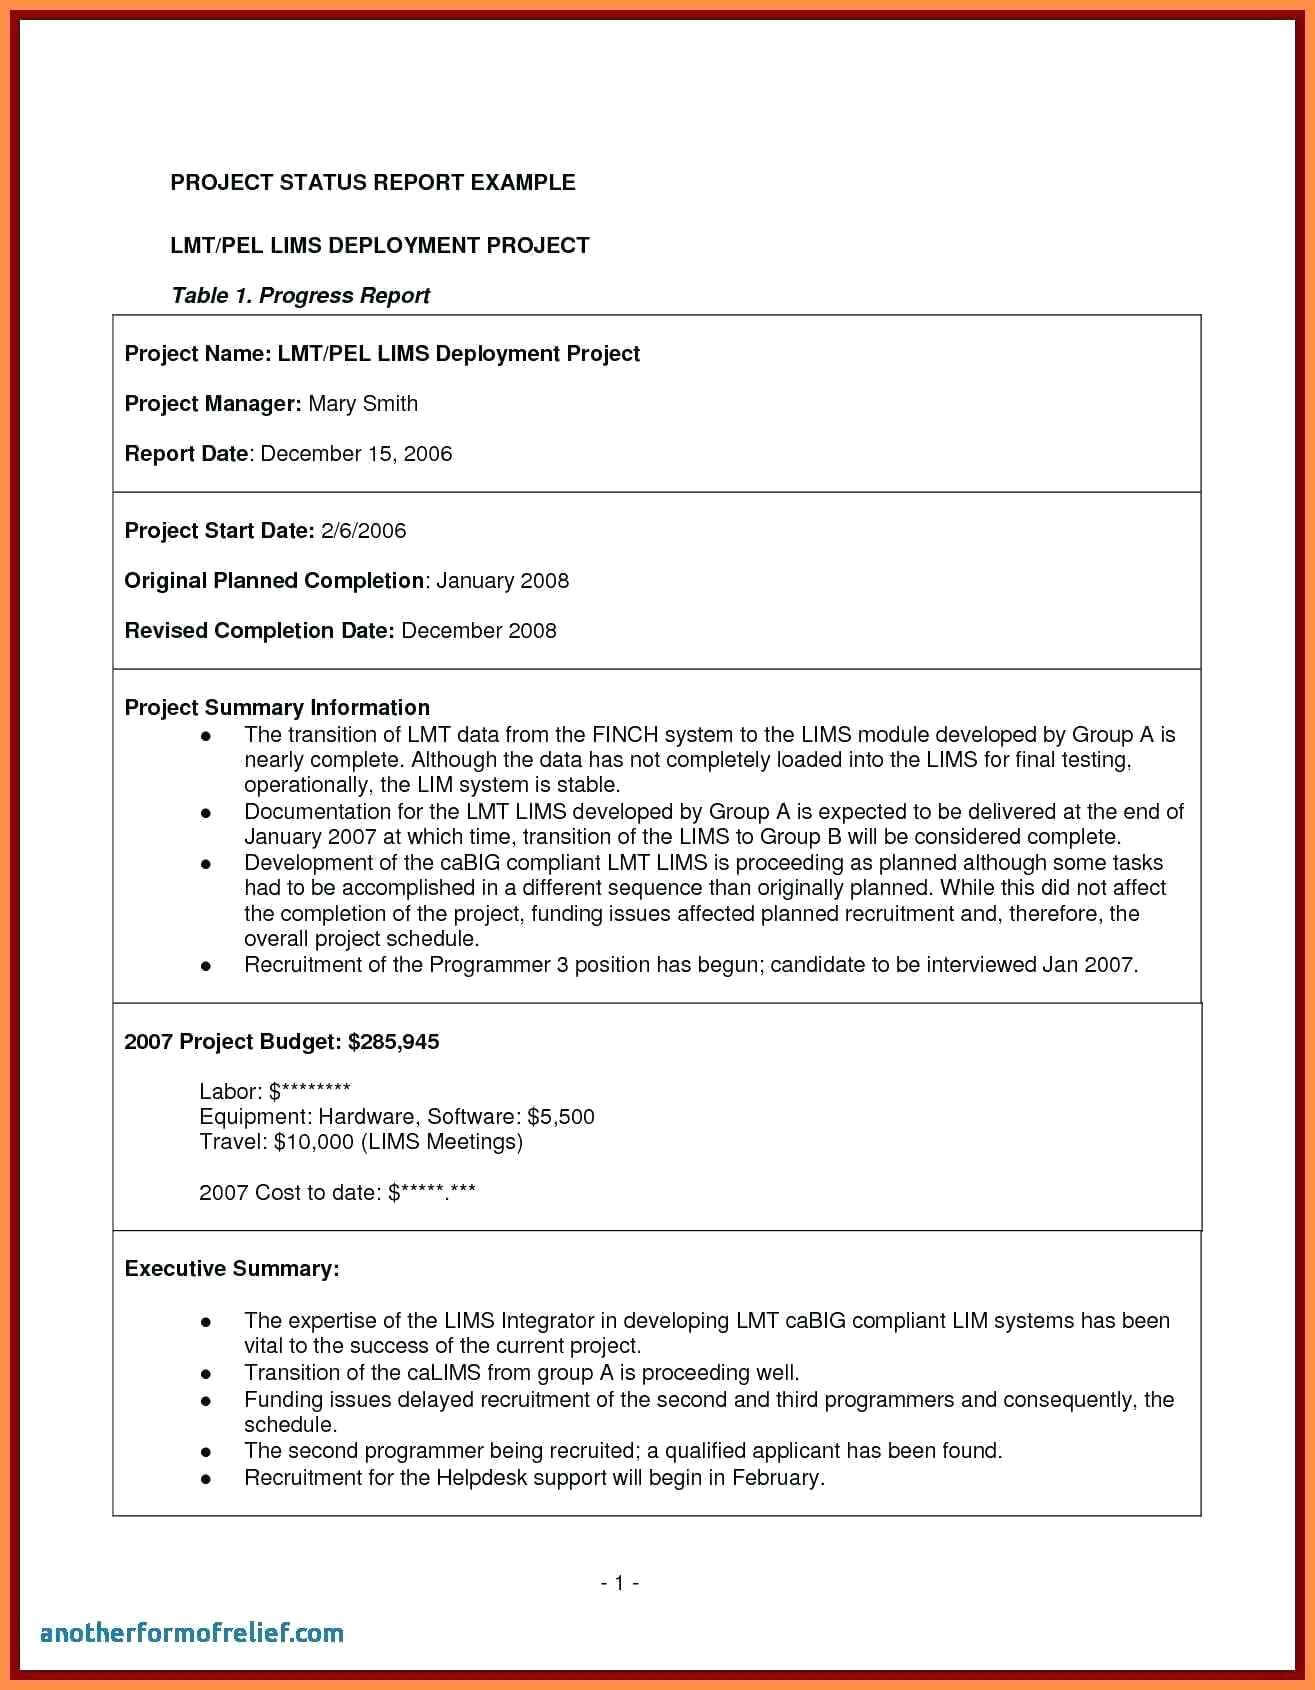 Final Ject Report Template E2 80 93 Redhatsheet Co Pertaining To Project Management Final Report Template